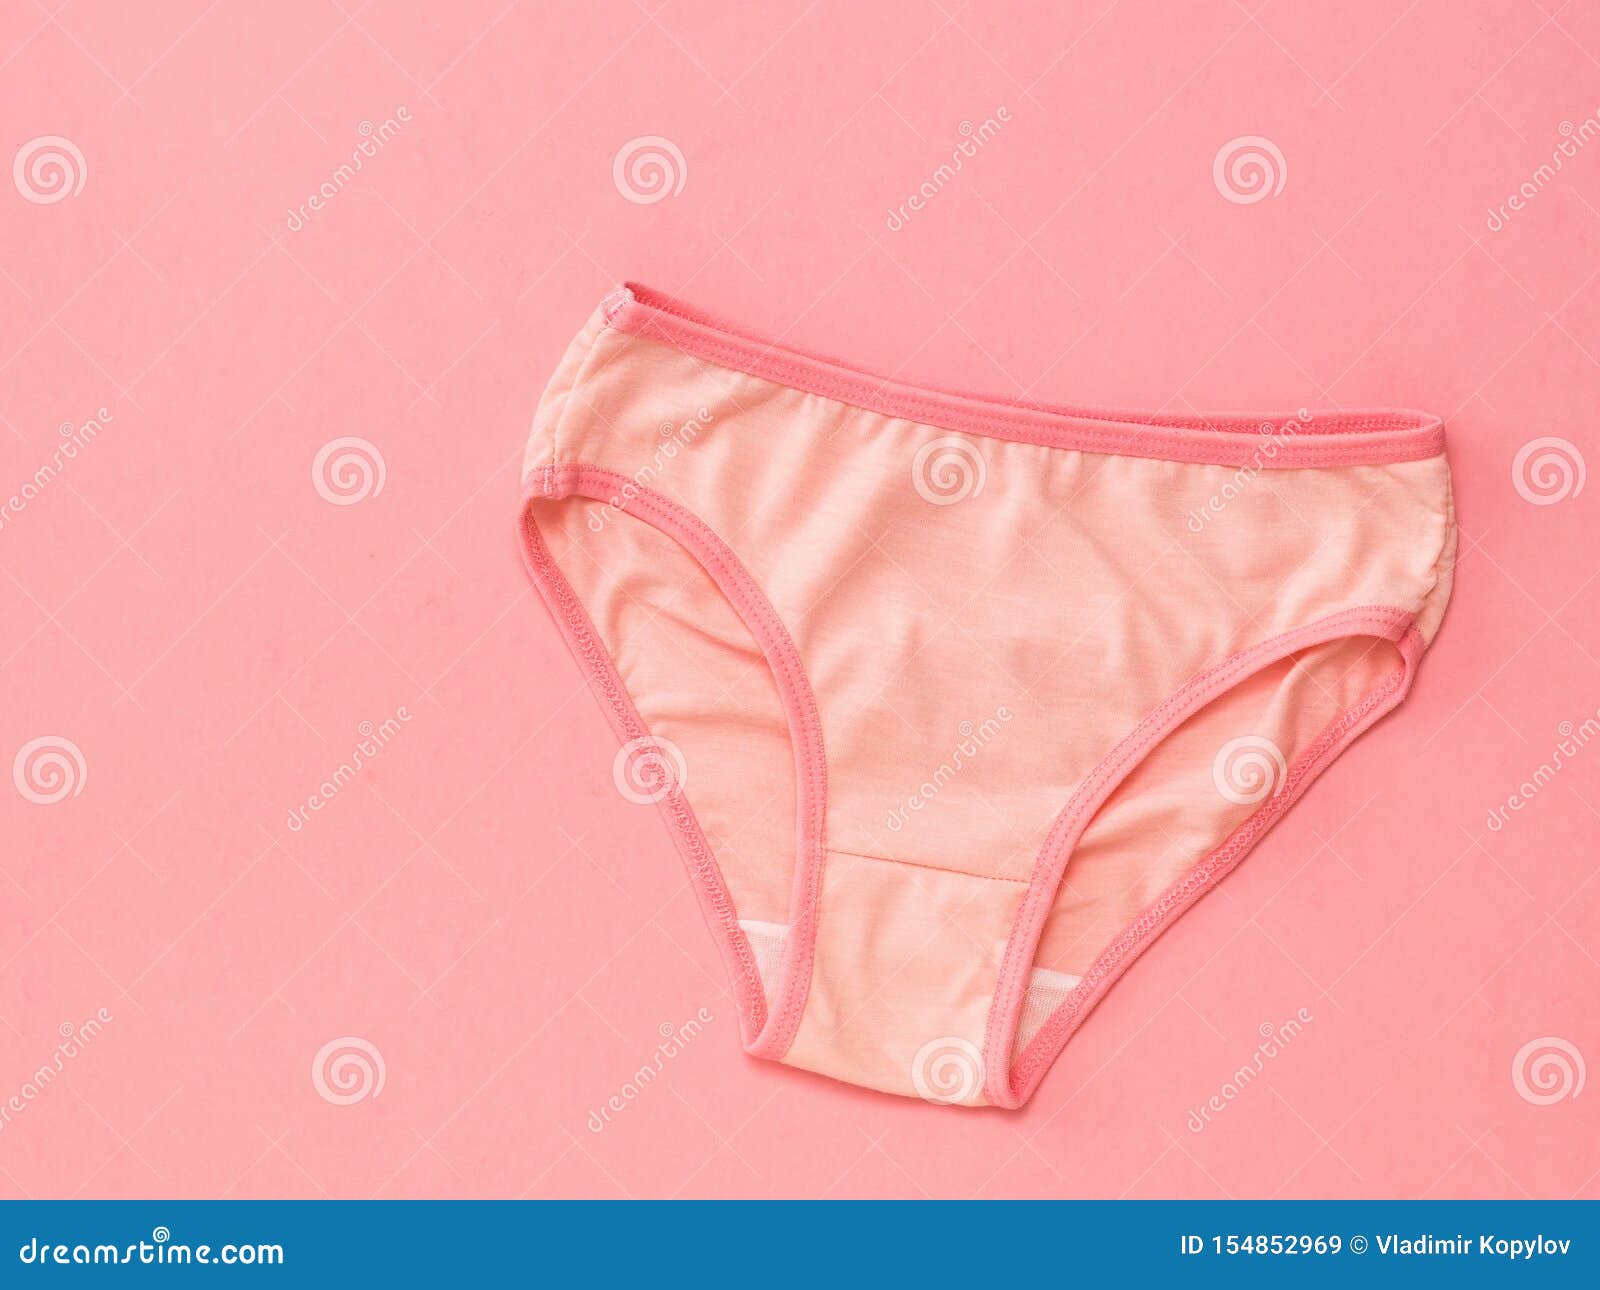 Pink Panties With Red Border On Pink Background The Concept Of Meeting 